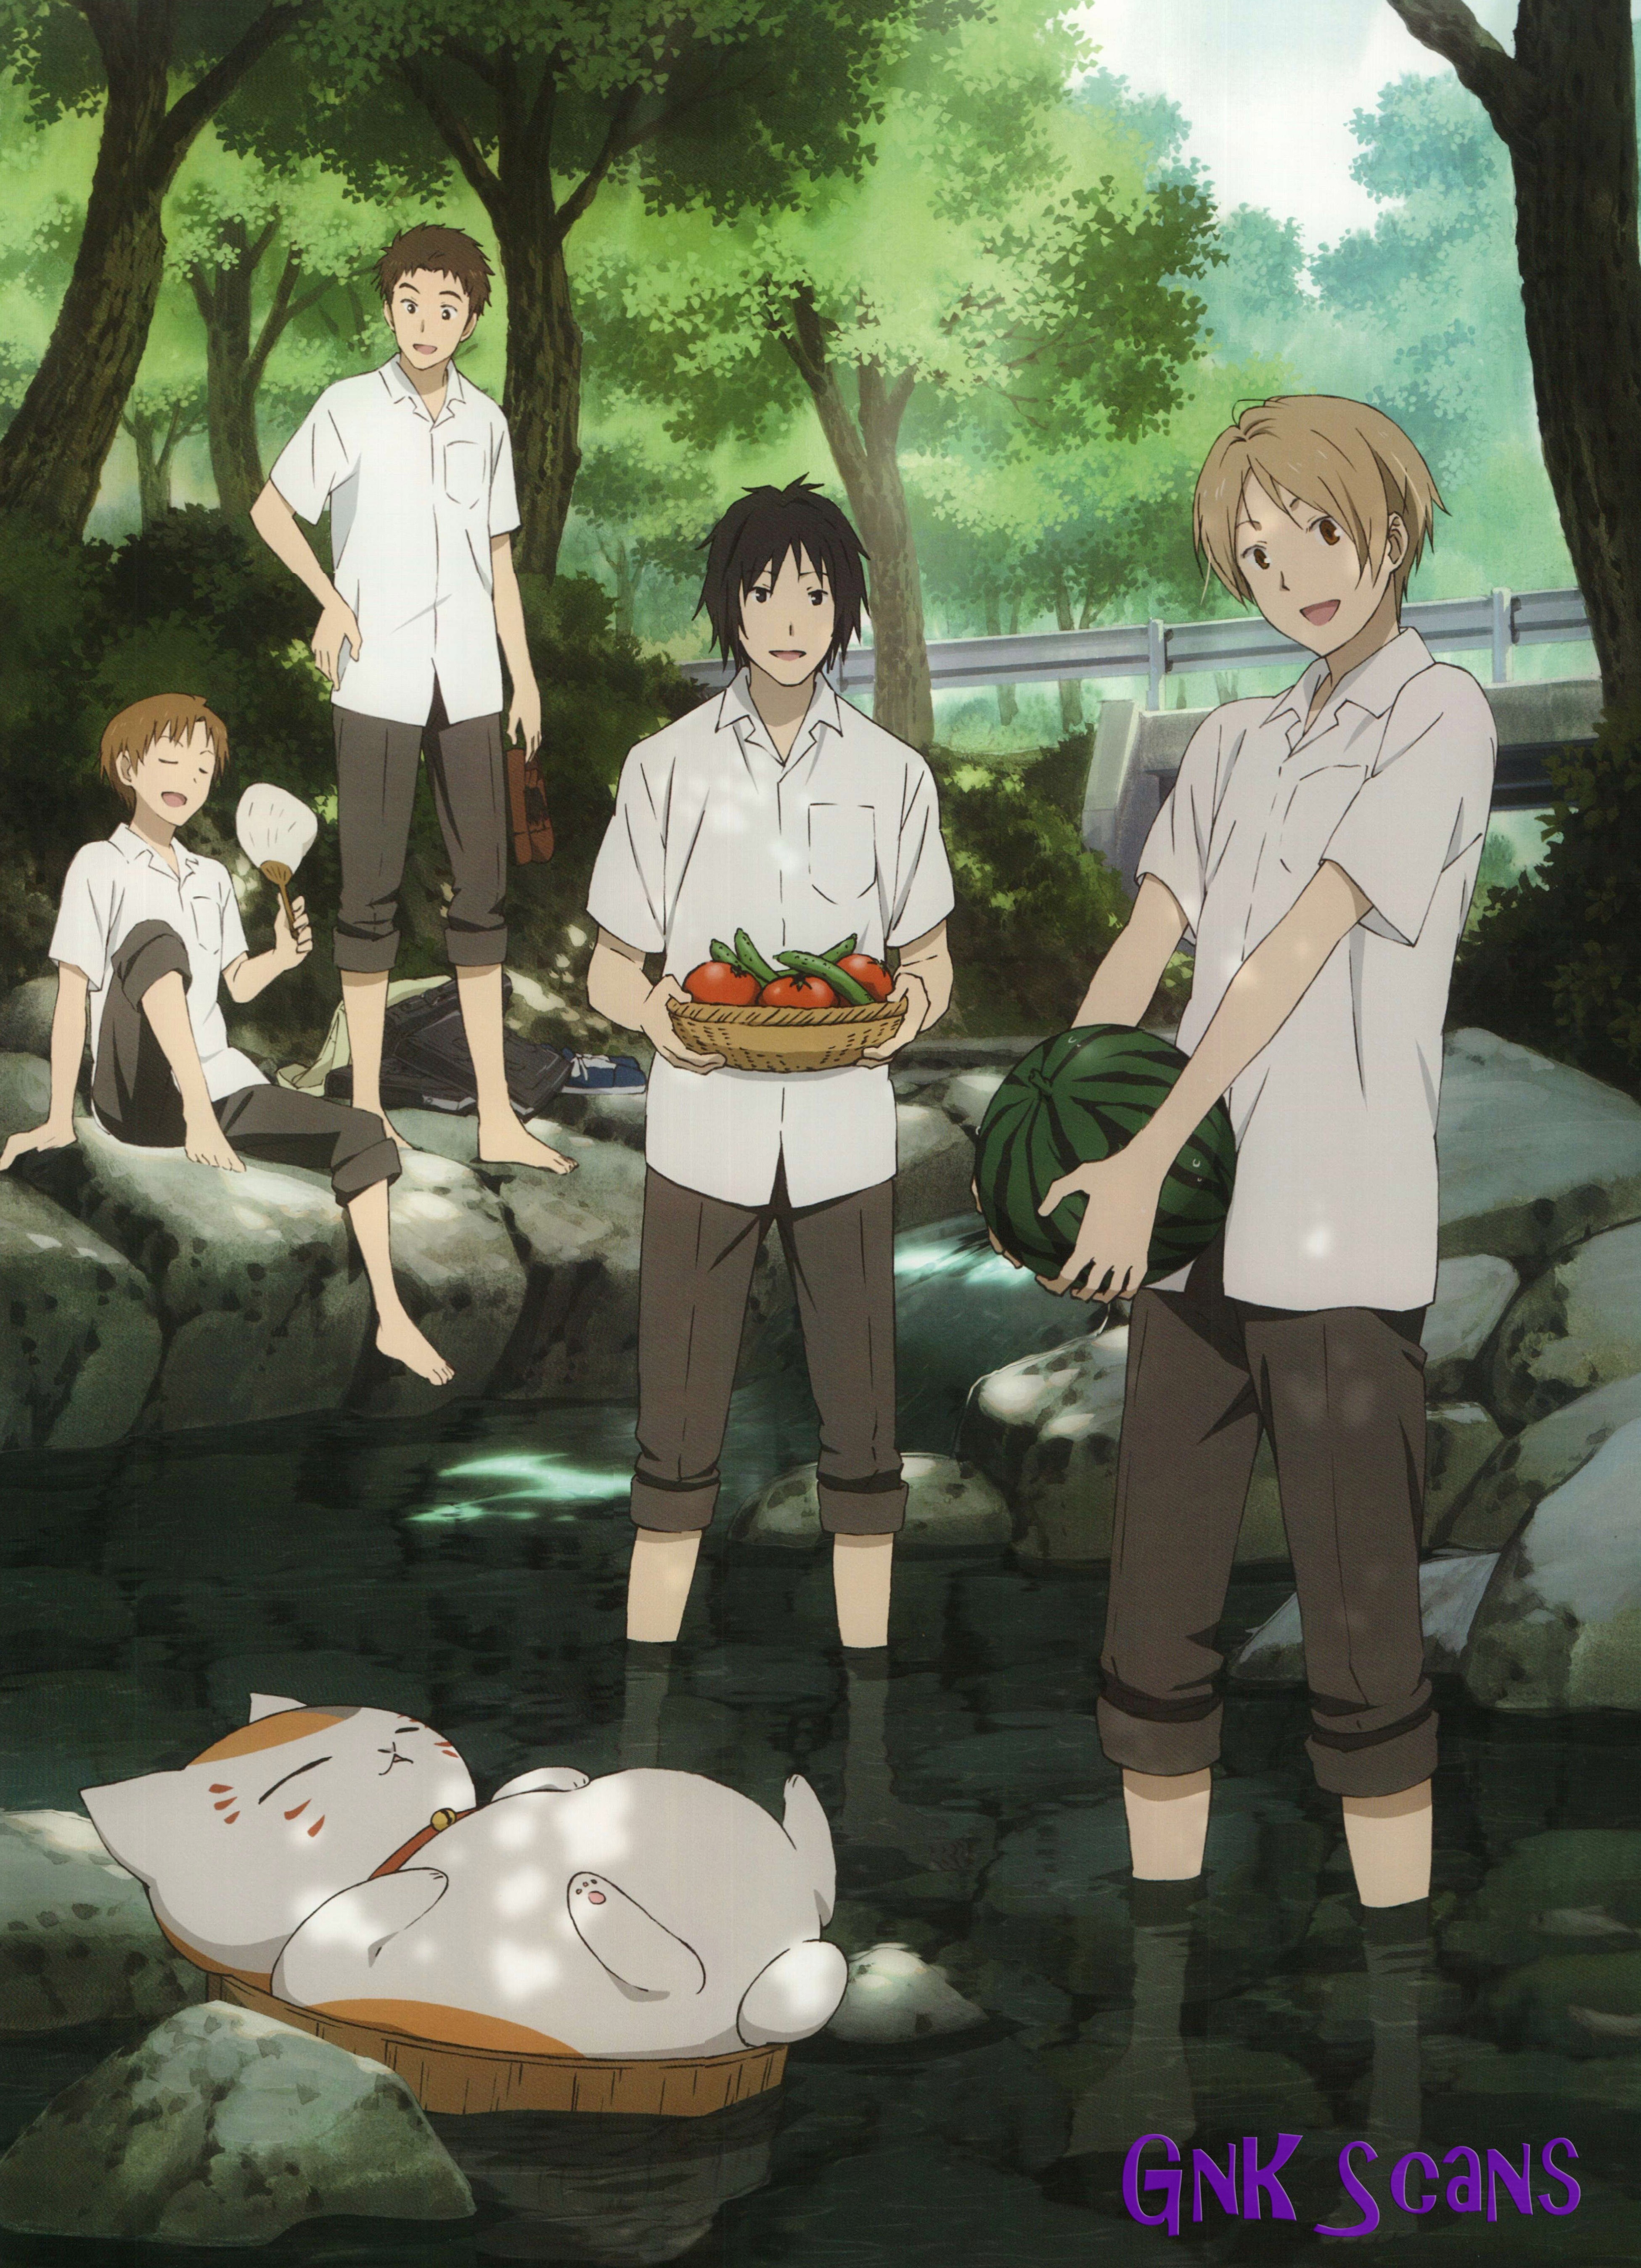 Anime 3902x5393 anime anime boys food cats Natsume Yuujinchou animals outdoors mammals watermelons Group of Men